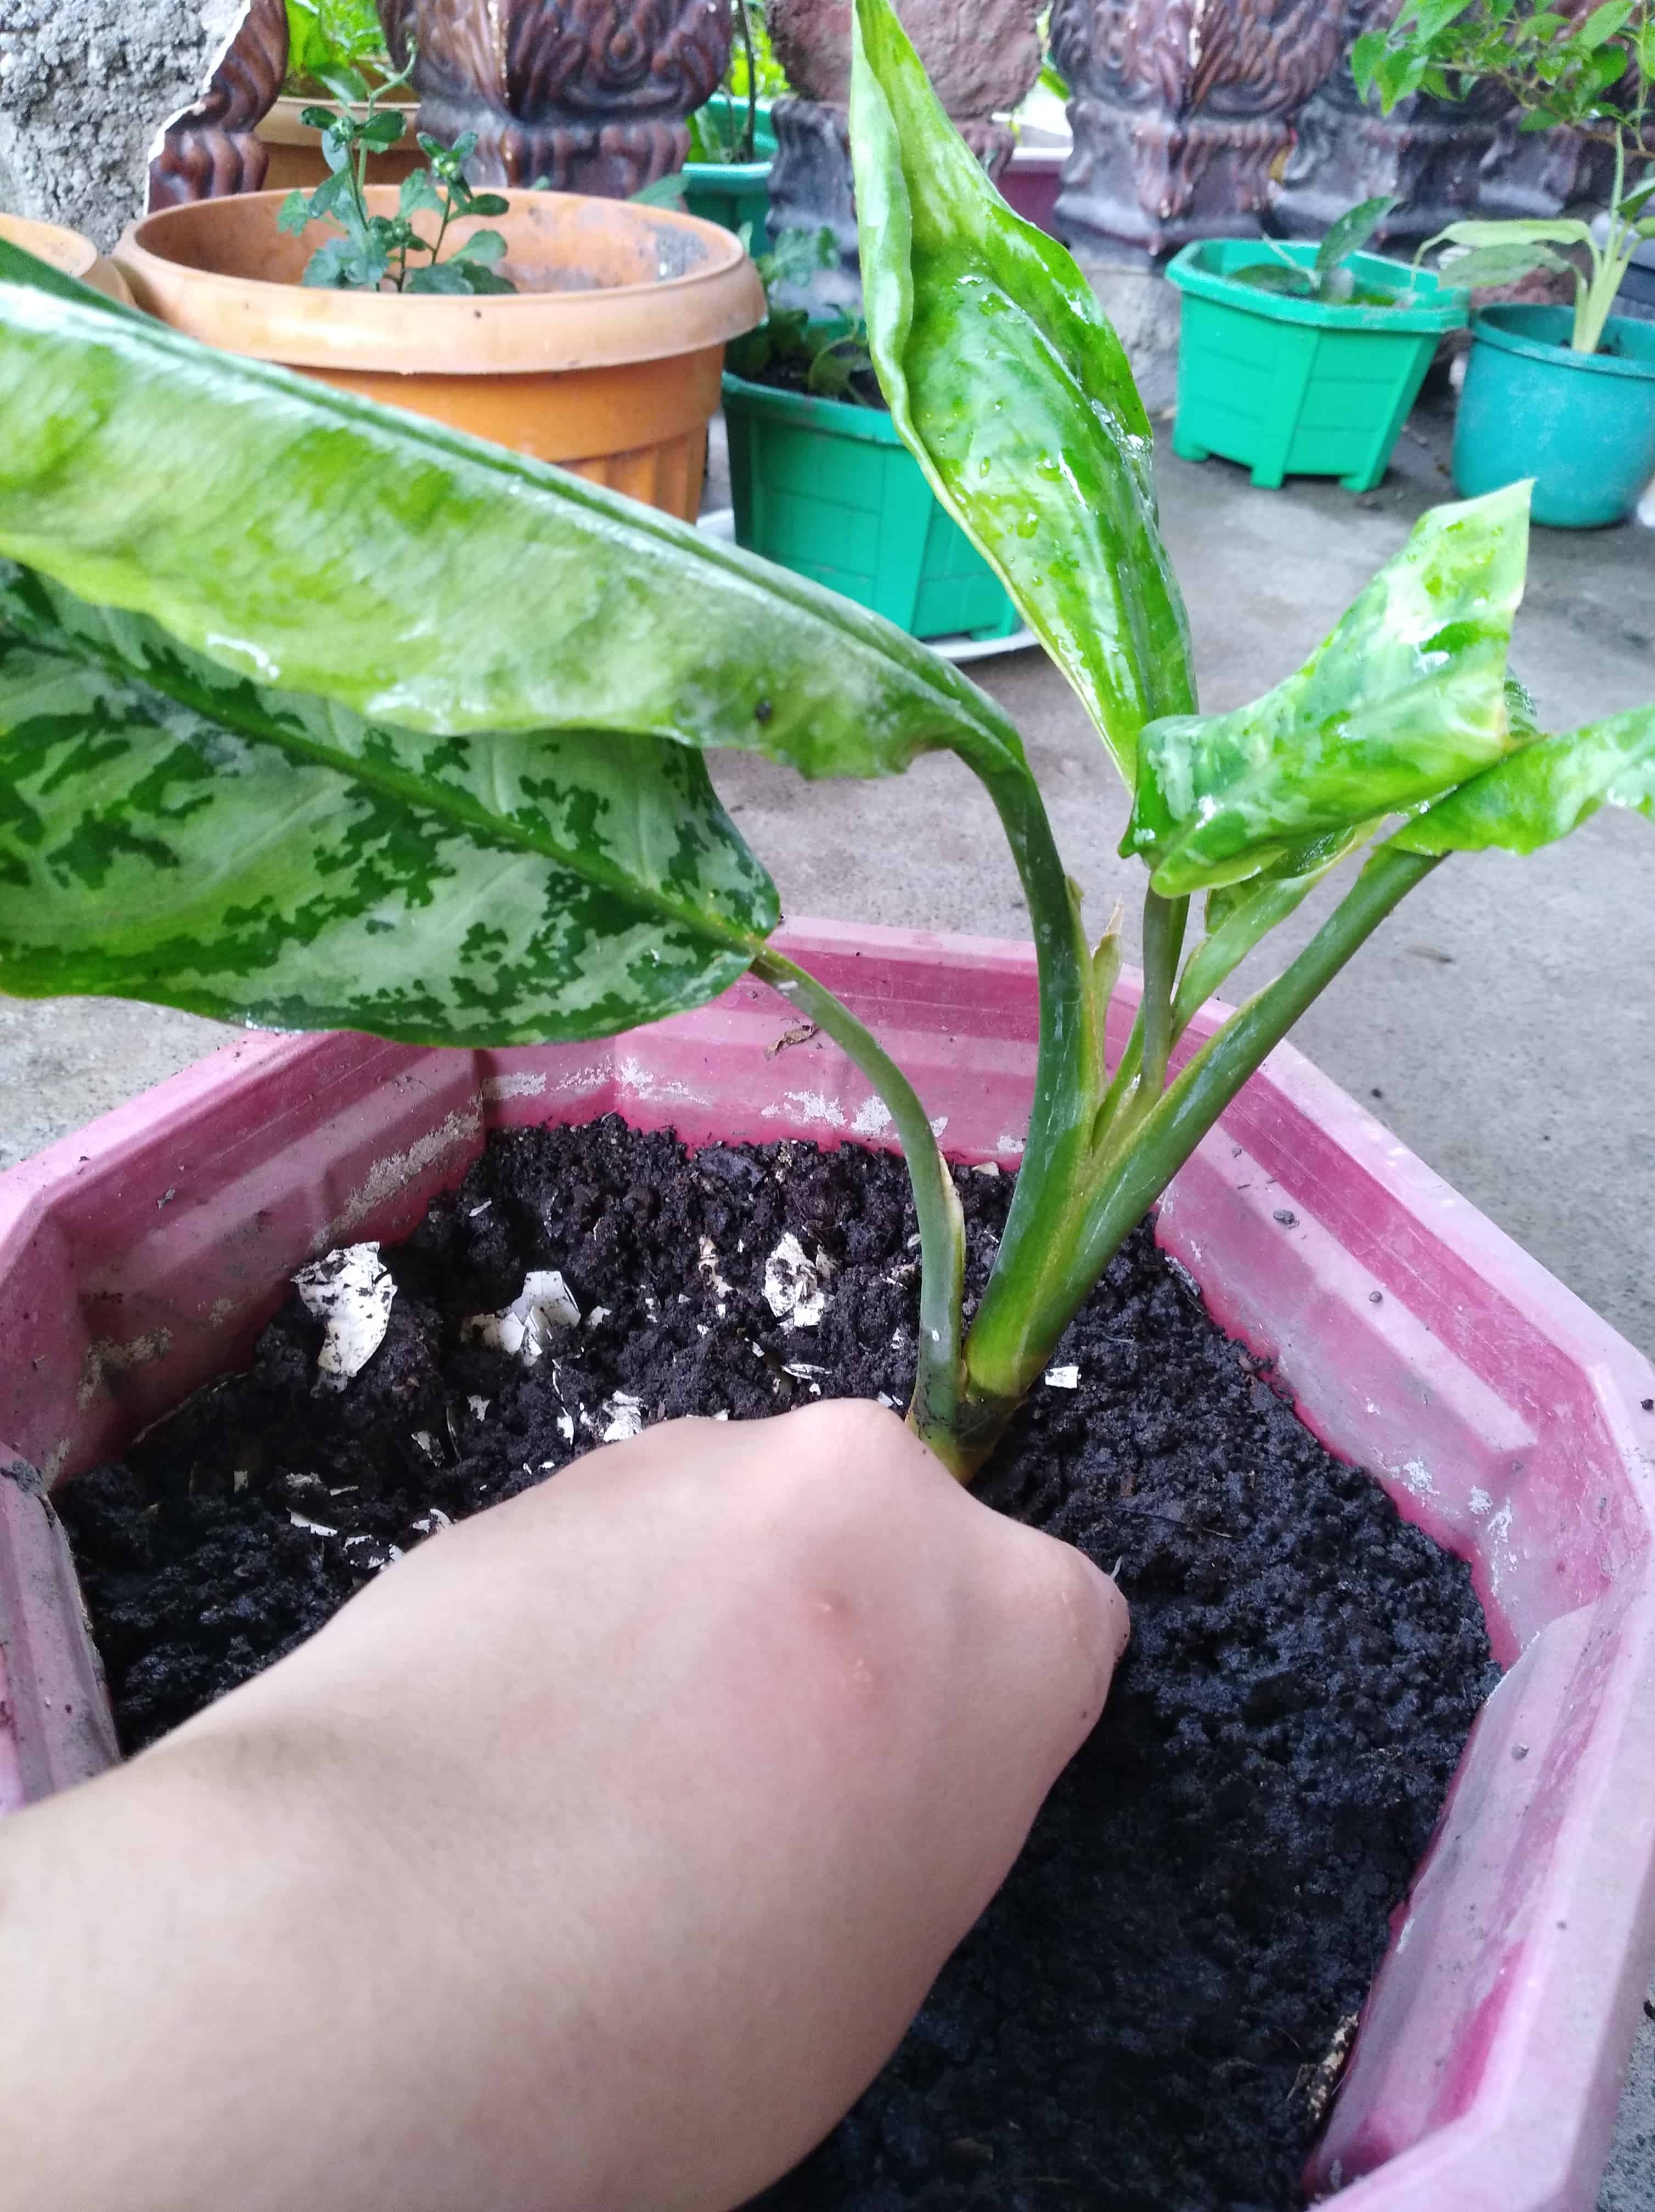 Placing the plant back in a pot with fresh, dry soil after trimming off dead roots and damaged leaves.